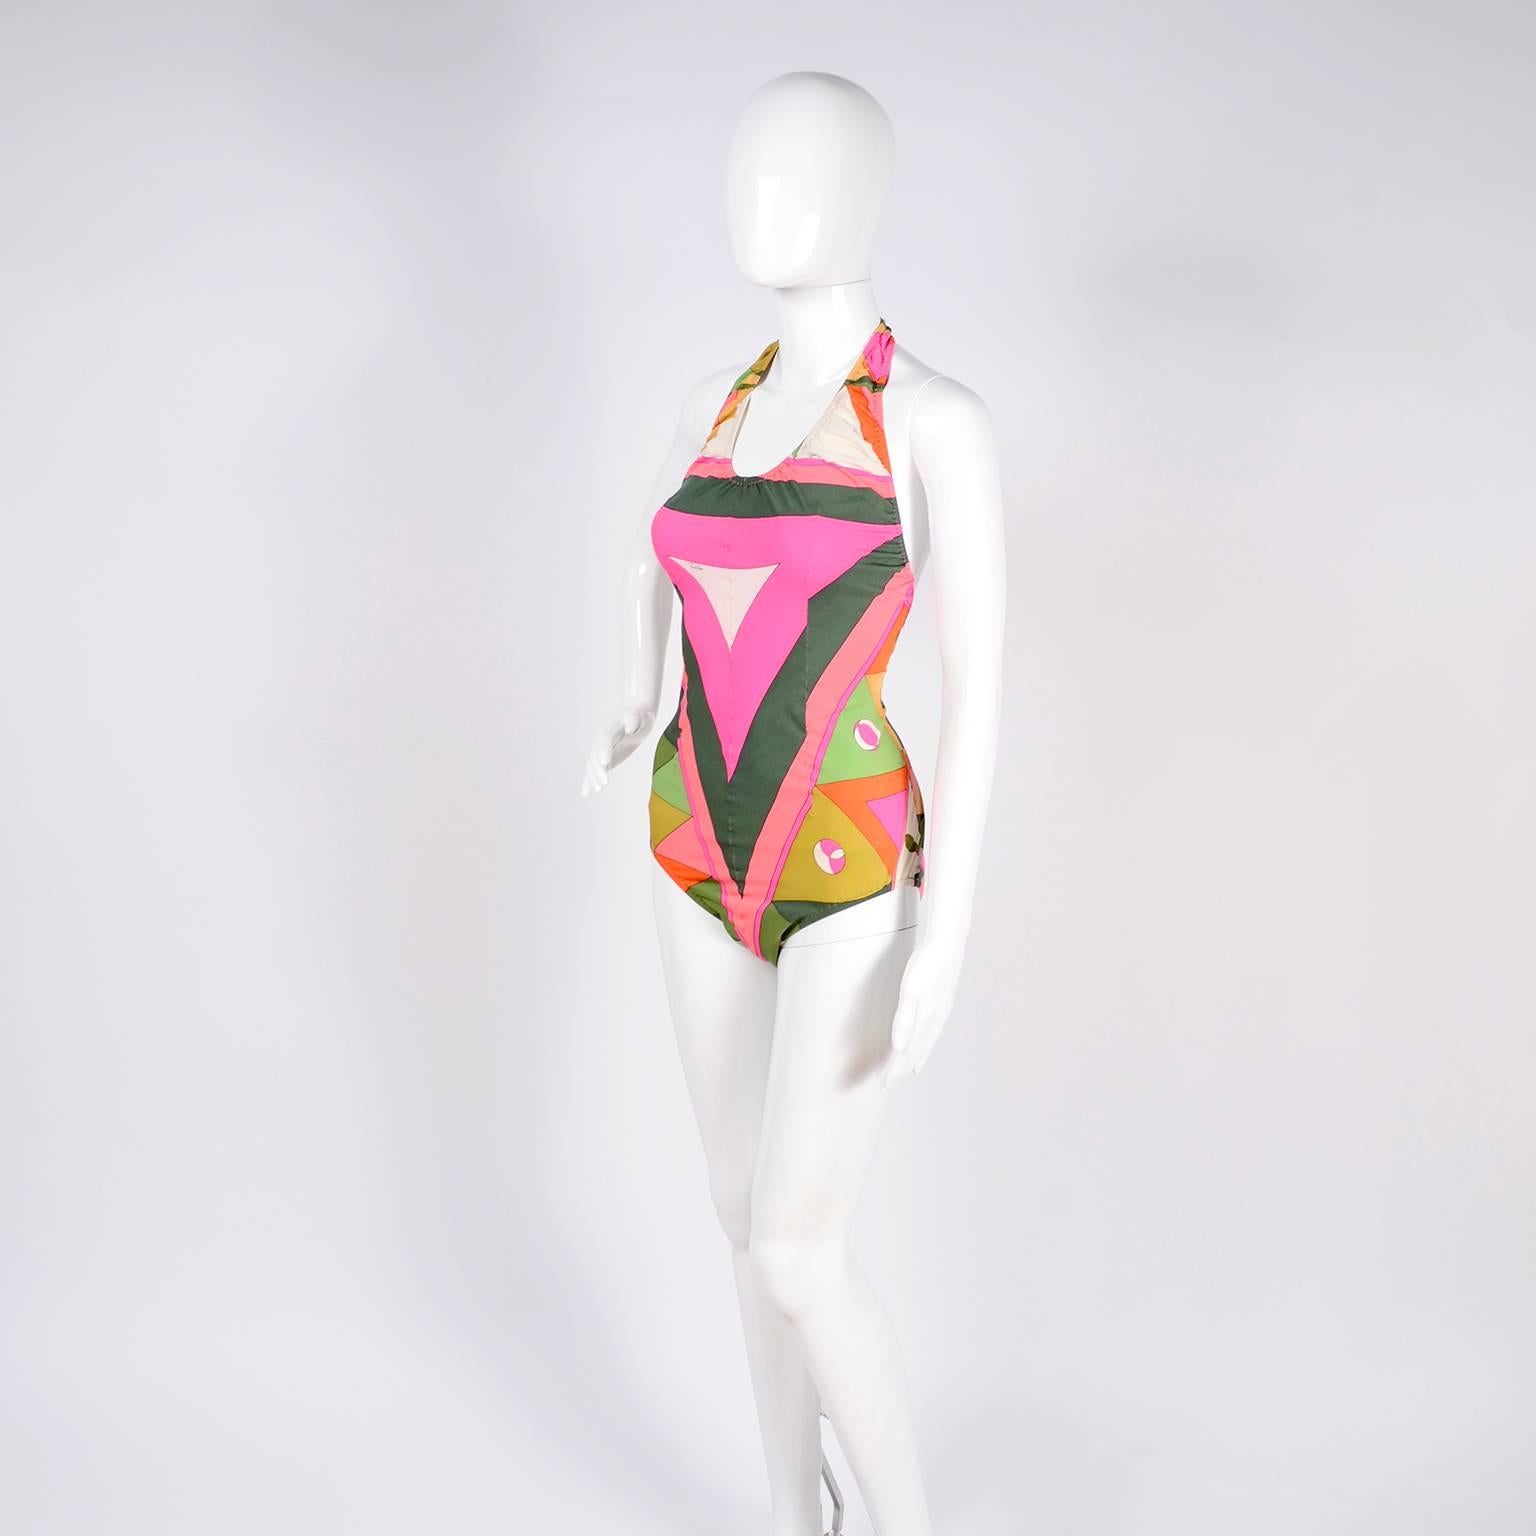 This is a fabulous vintage Pucci swimsuit from the late 1960's.  The suit fits a size Medium and has the Emilio Pucci signature print and the Emilio Pucci Florence - Italy label as well as the Exclusively for Saks Fifth Avenue Italy label.  The suit